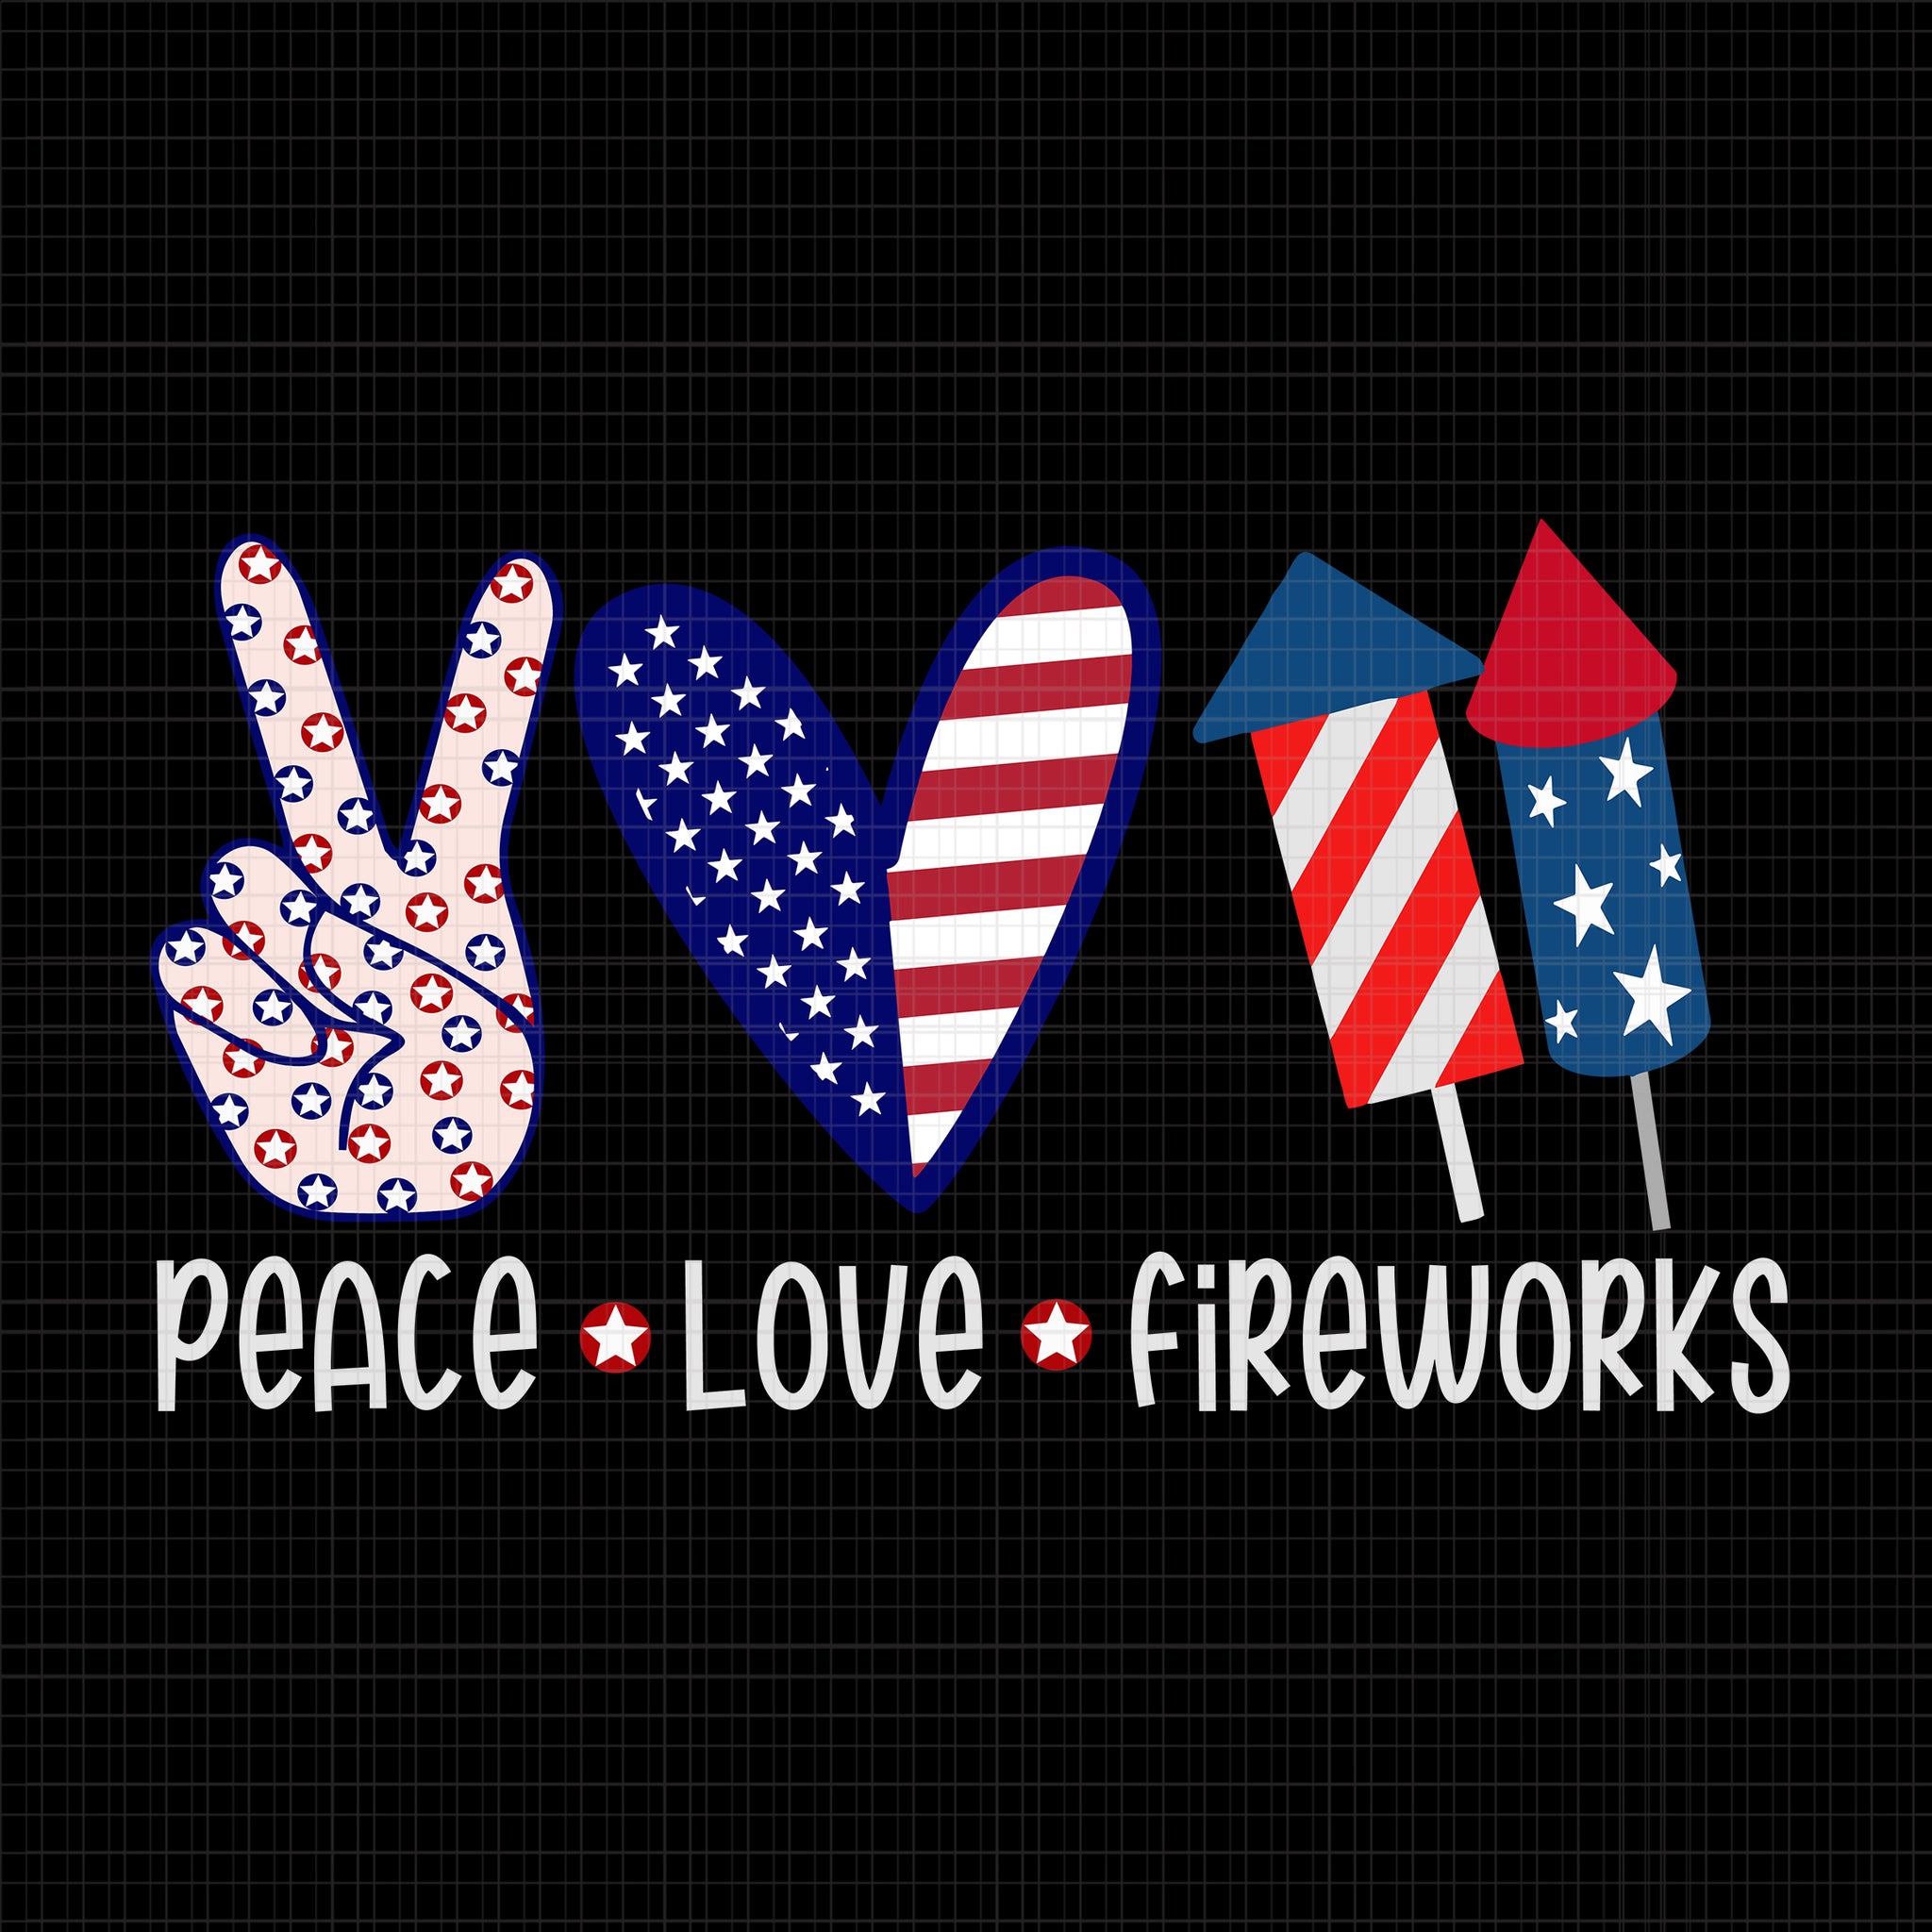 Peace love fireworks svg, Peace love fireworks 4th of July, Peace love fireworks, 4th of July svg, 4th of July vector